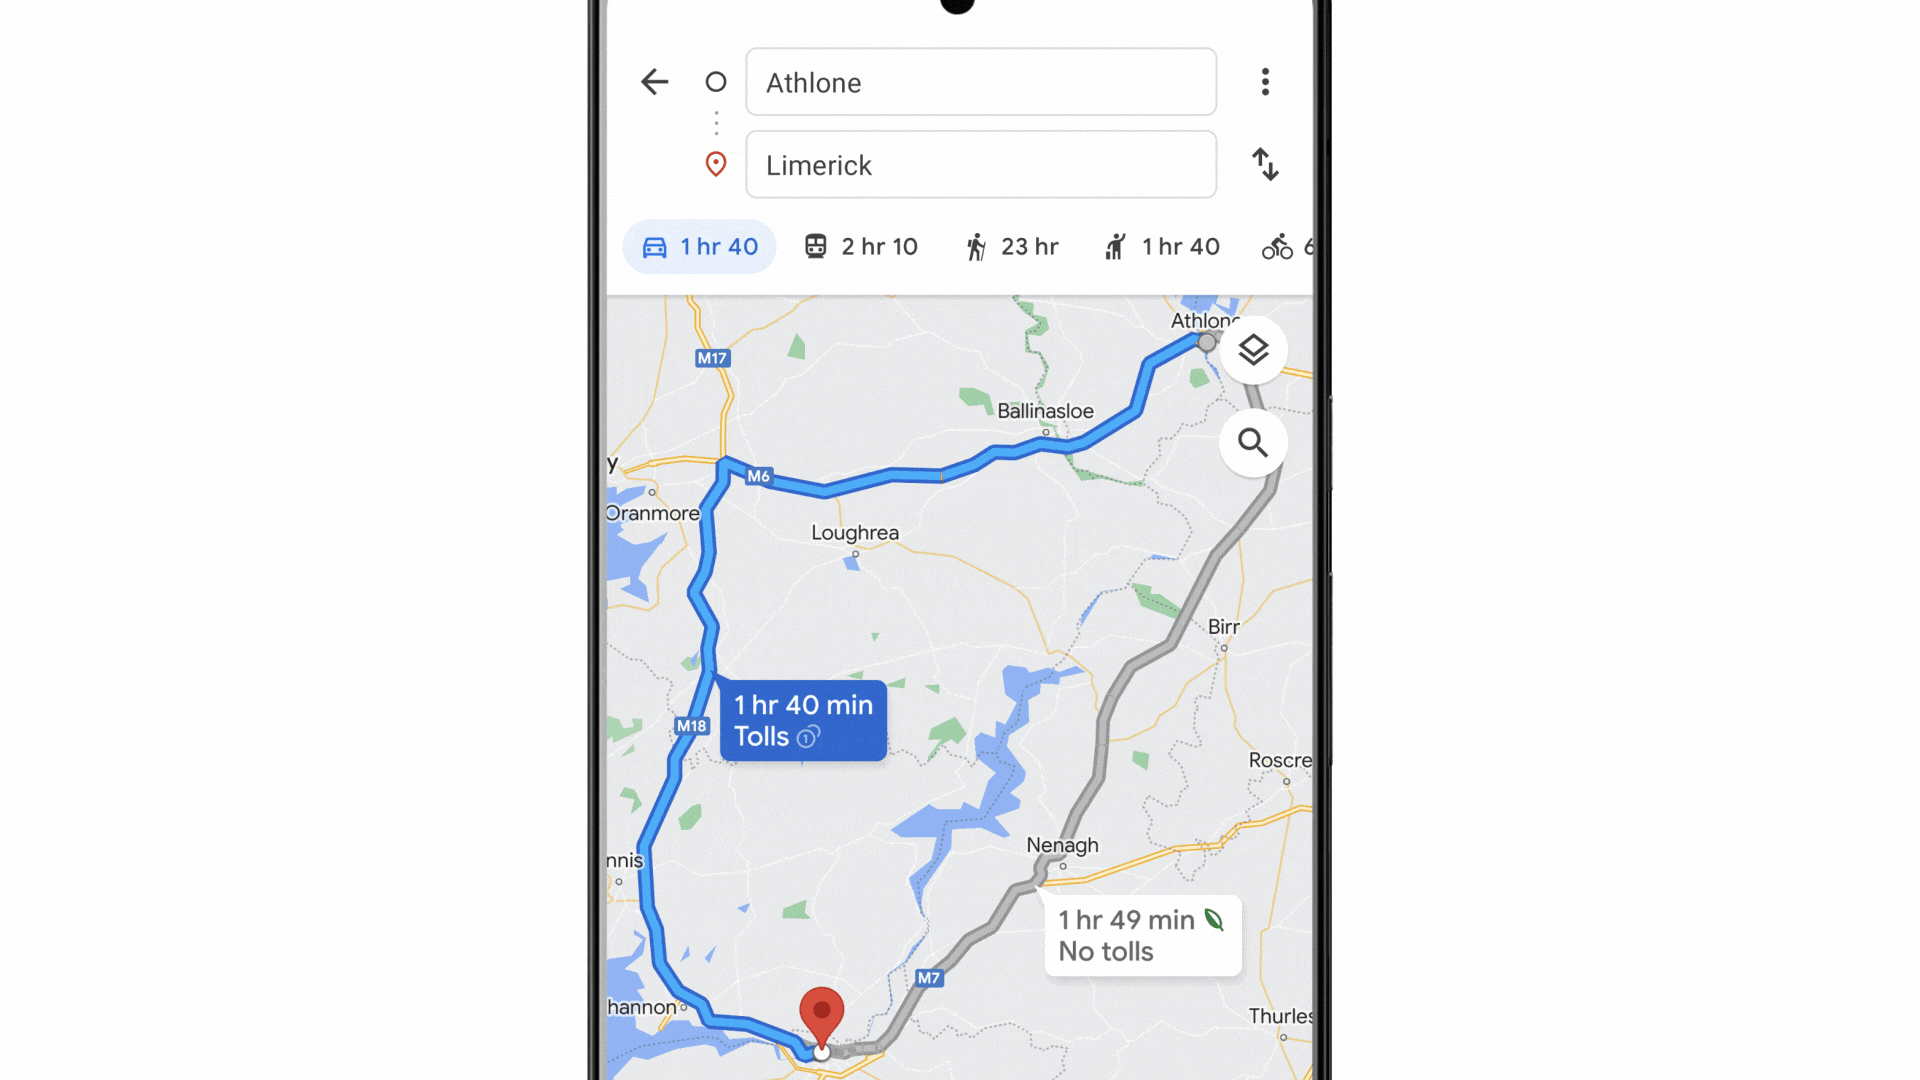 googfle maps new eco friendly routing options in action